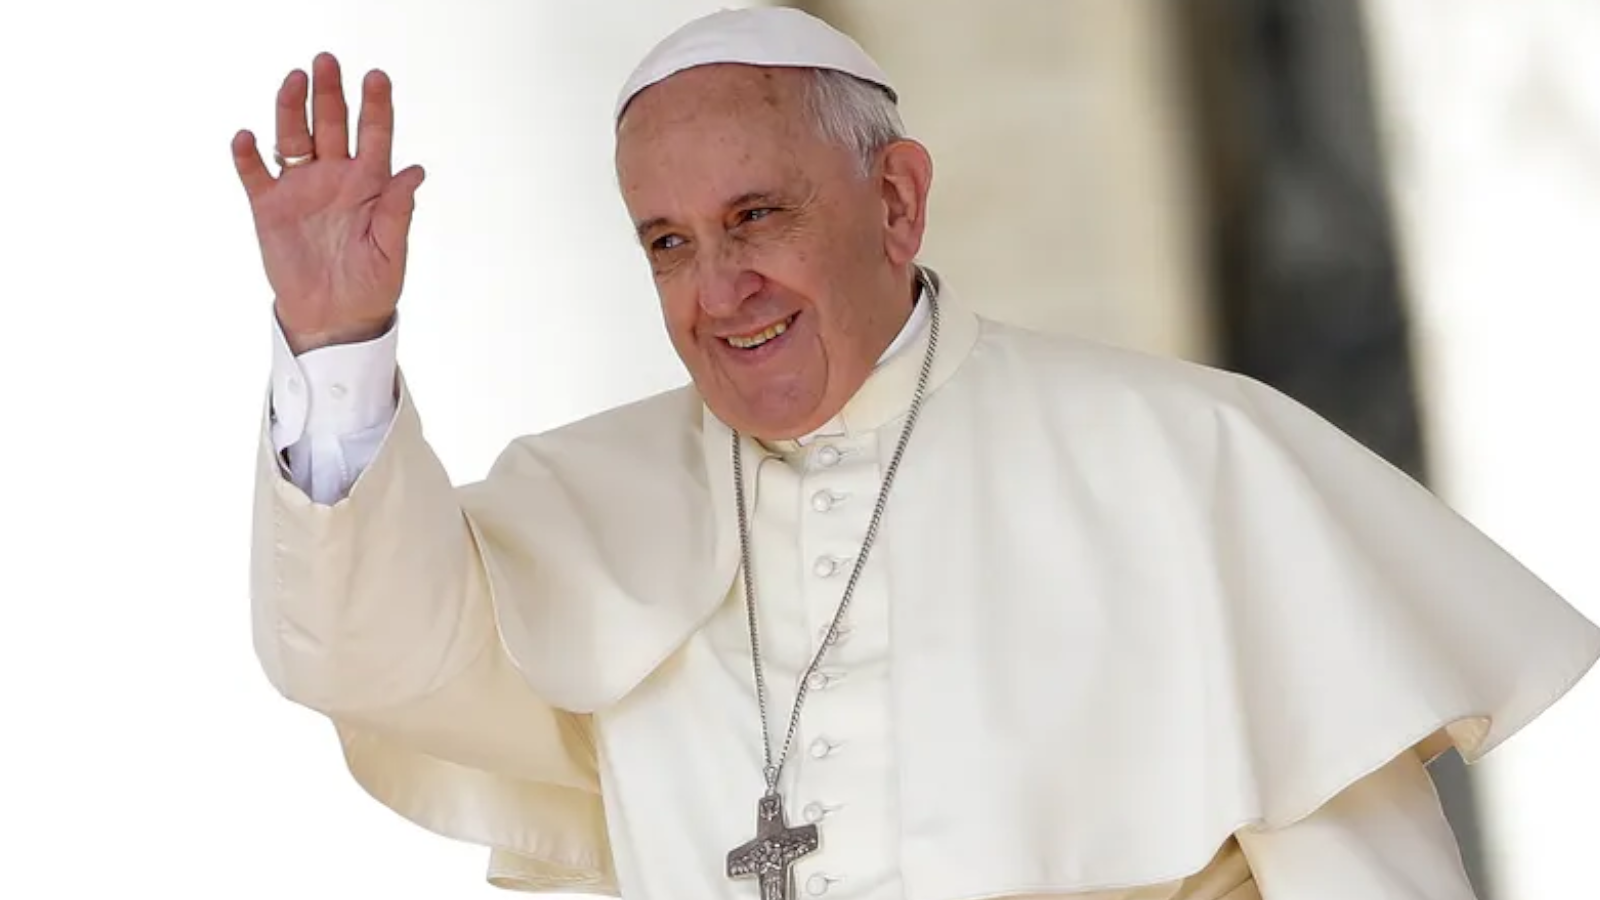 Pope Francis Calls Gender Ideology “Worst Danger” of Our Time